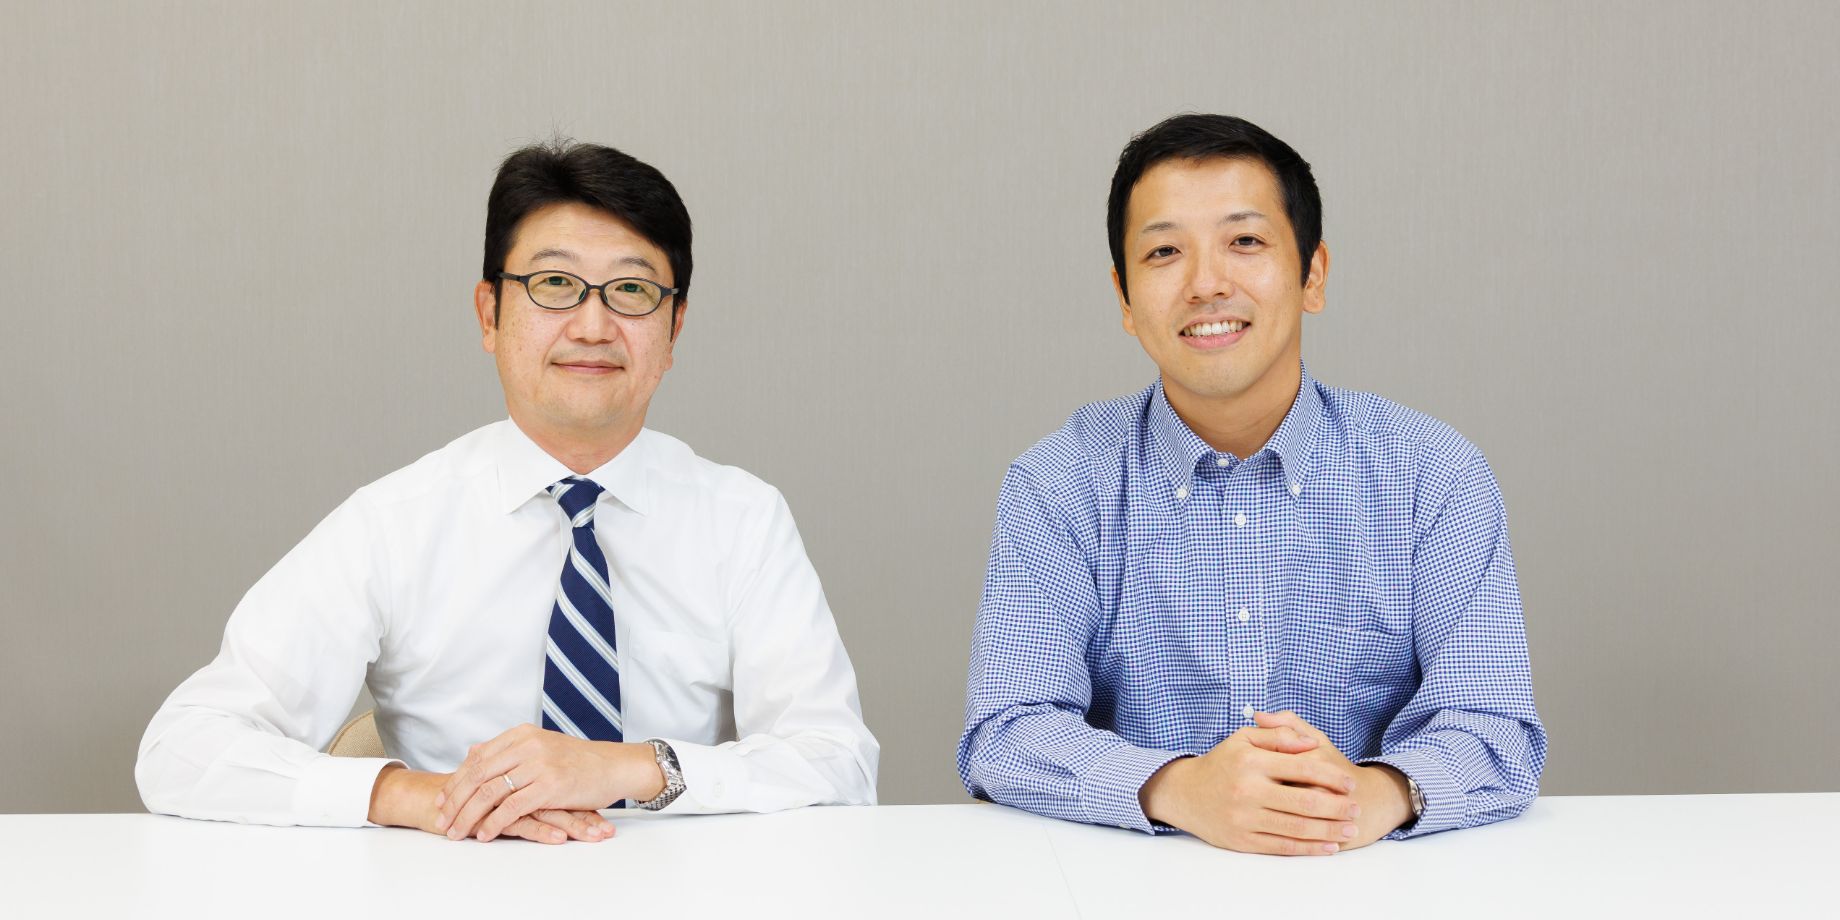 Toshiyuki Otobe, Executive Officer and President of the Personnel Unit (left) and Shinsaku Takano of the DX Strategy Division (right)